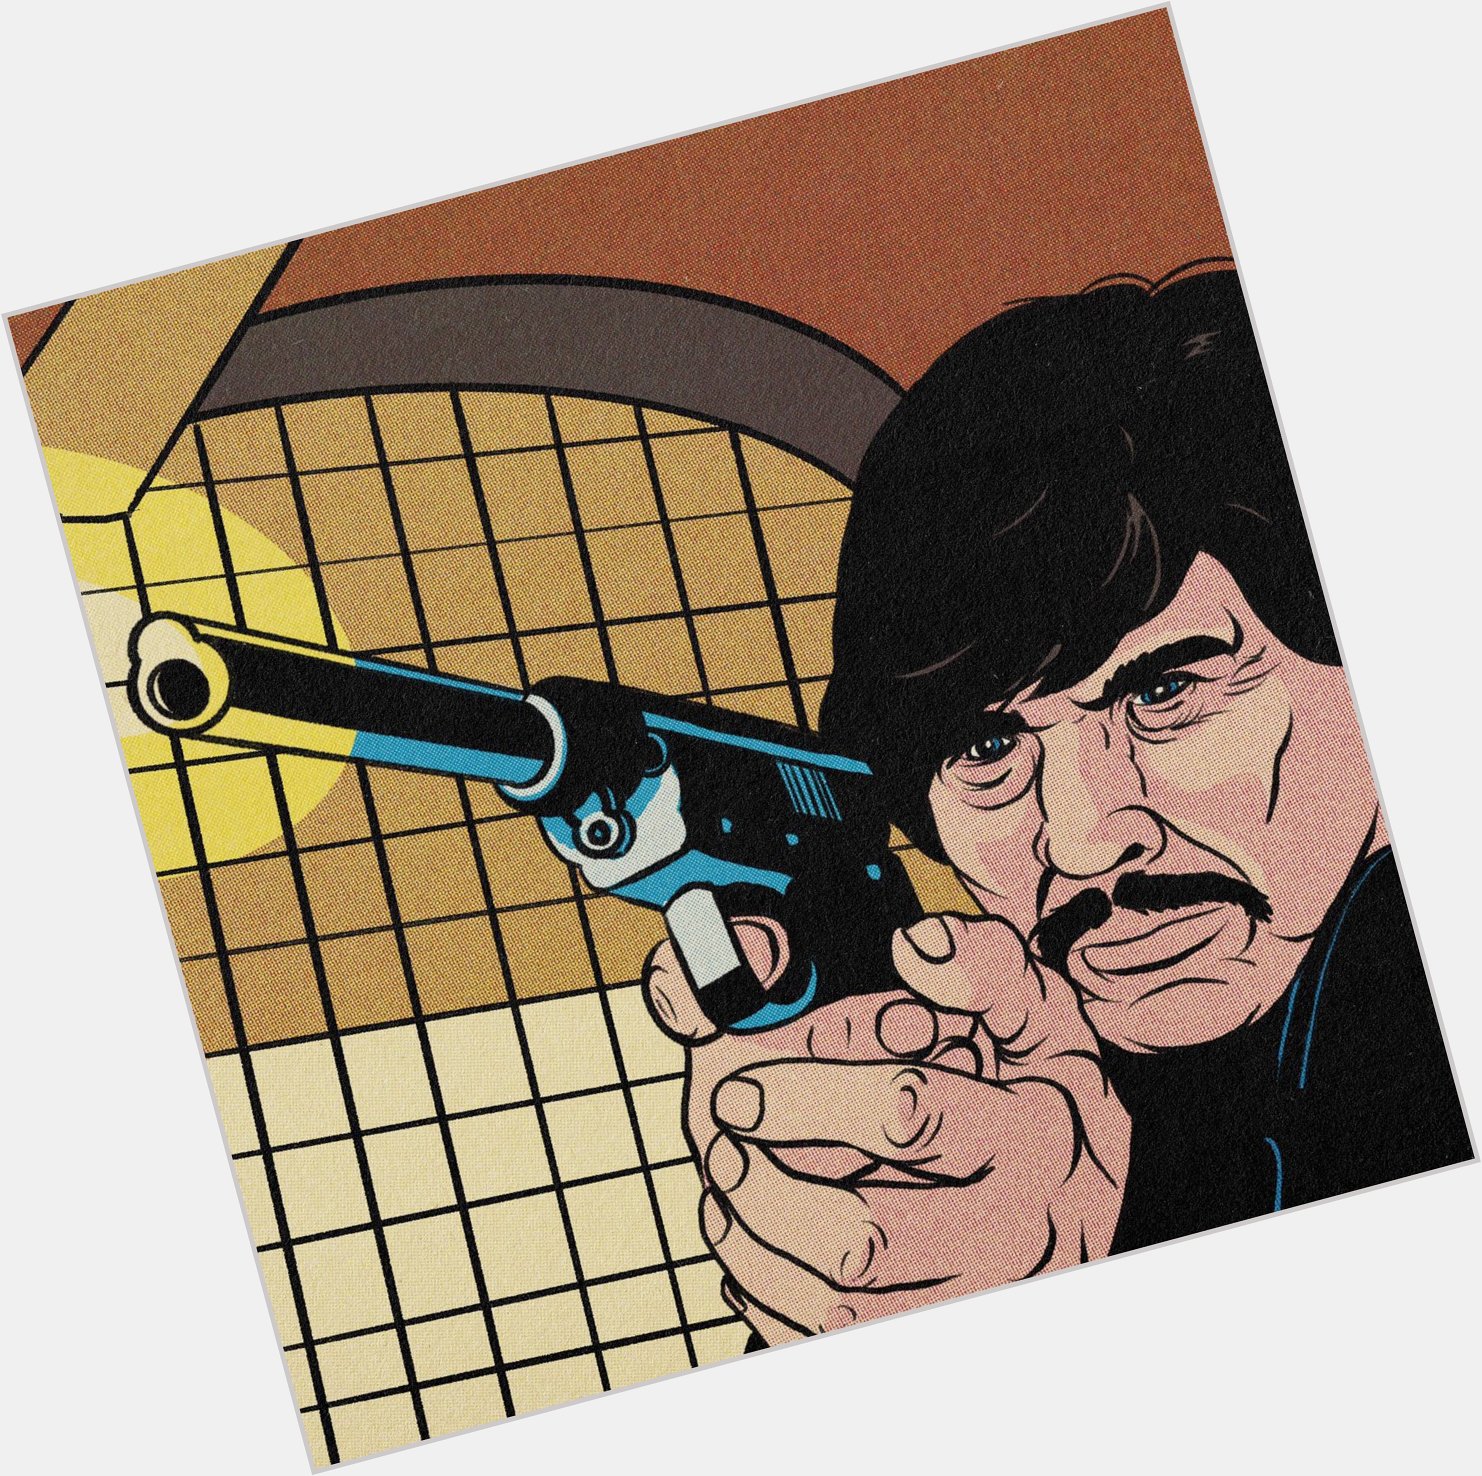 Happy belated birthday to Charles Bronson!
The original Death Wish is an incredible piece of 70s crime cinema 